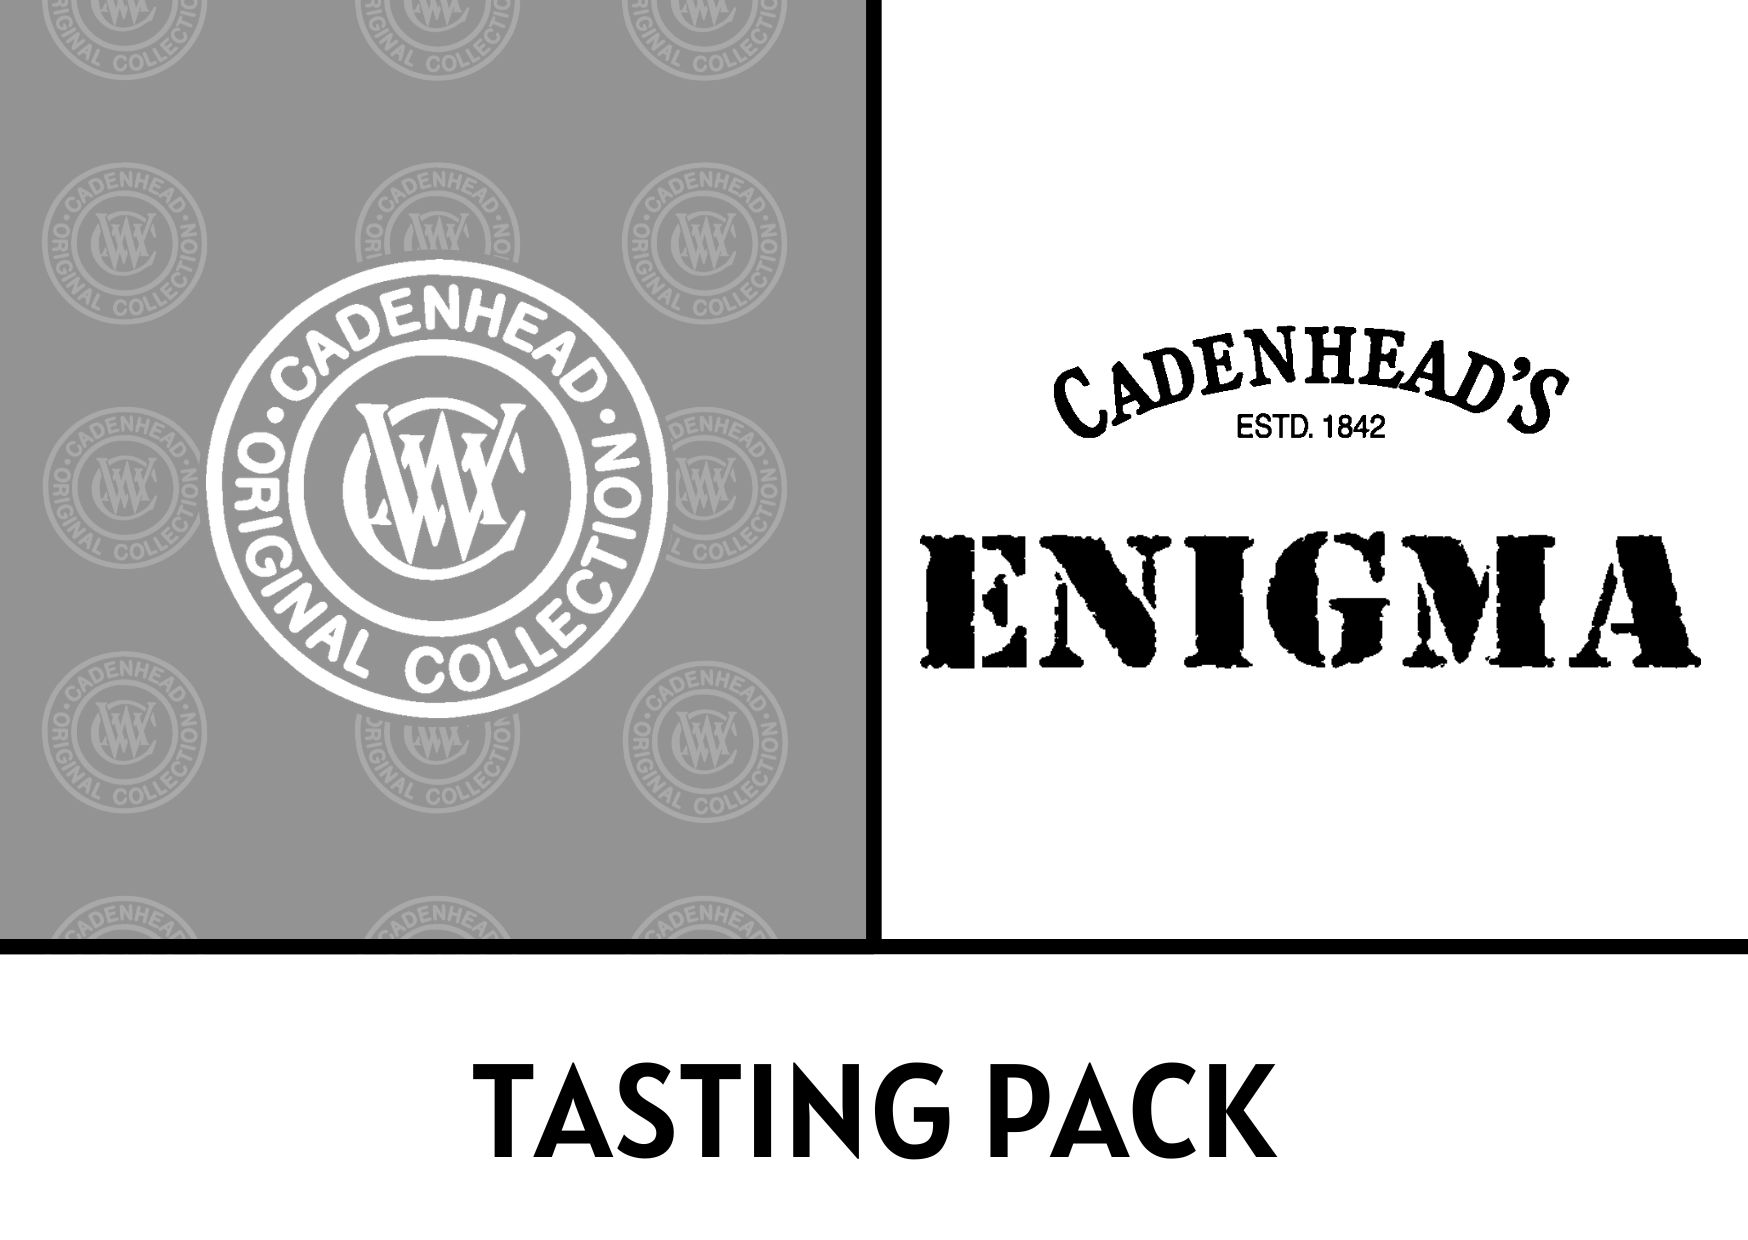 Cadenhead's Original Collection and Enigma Tasting Pack (September